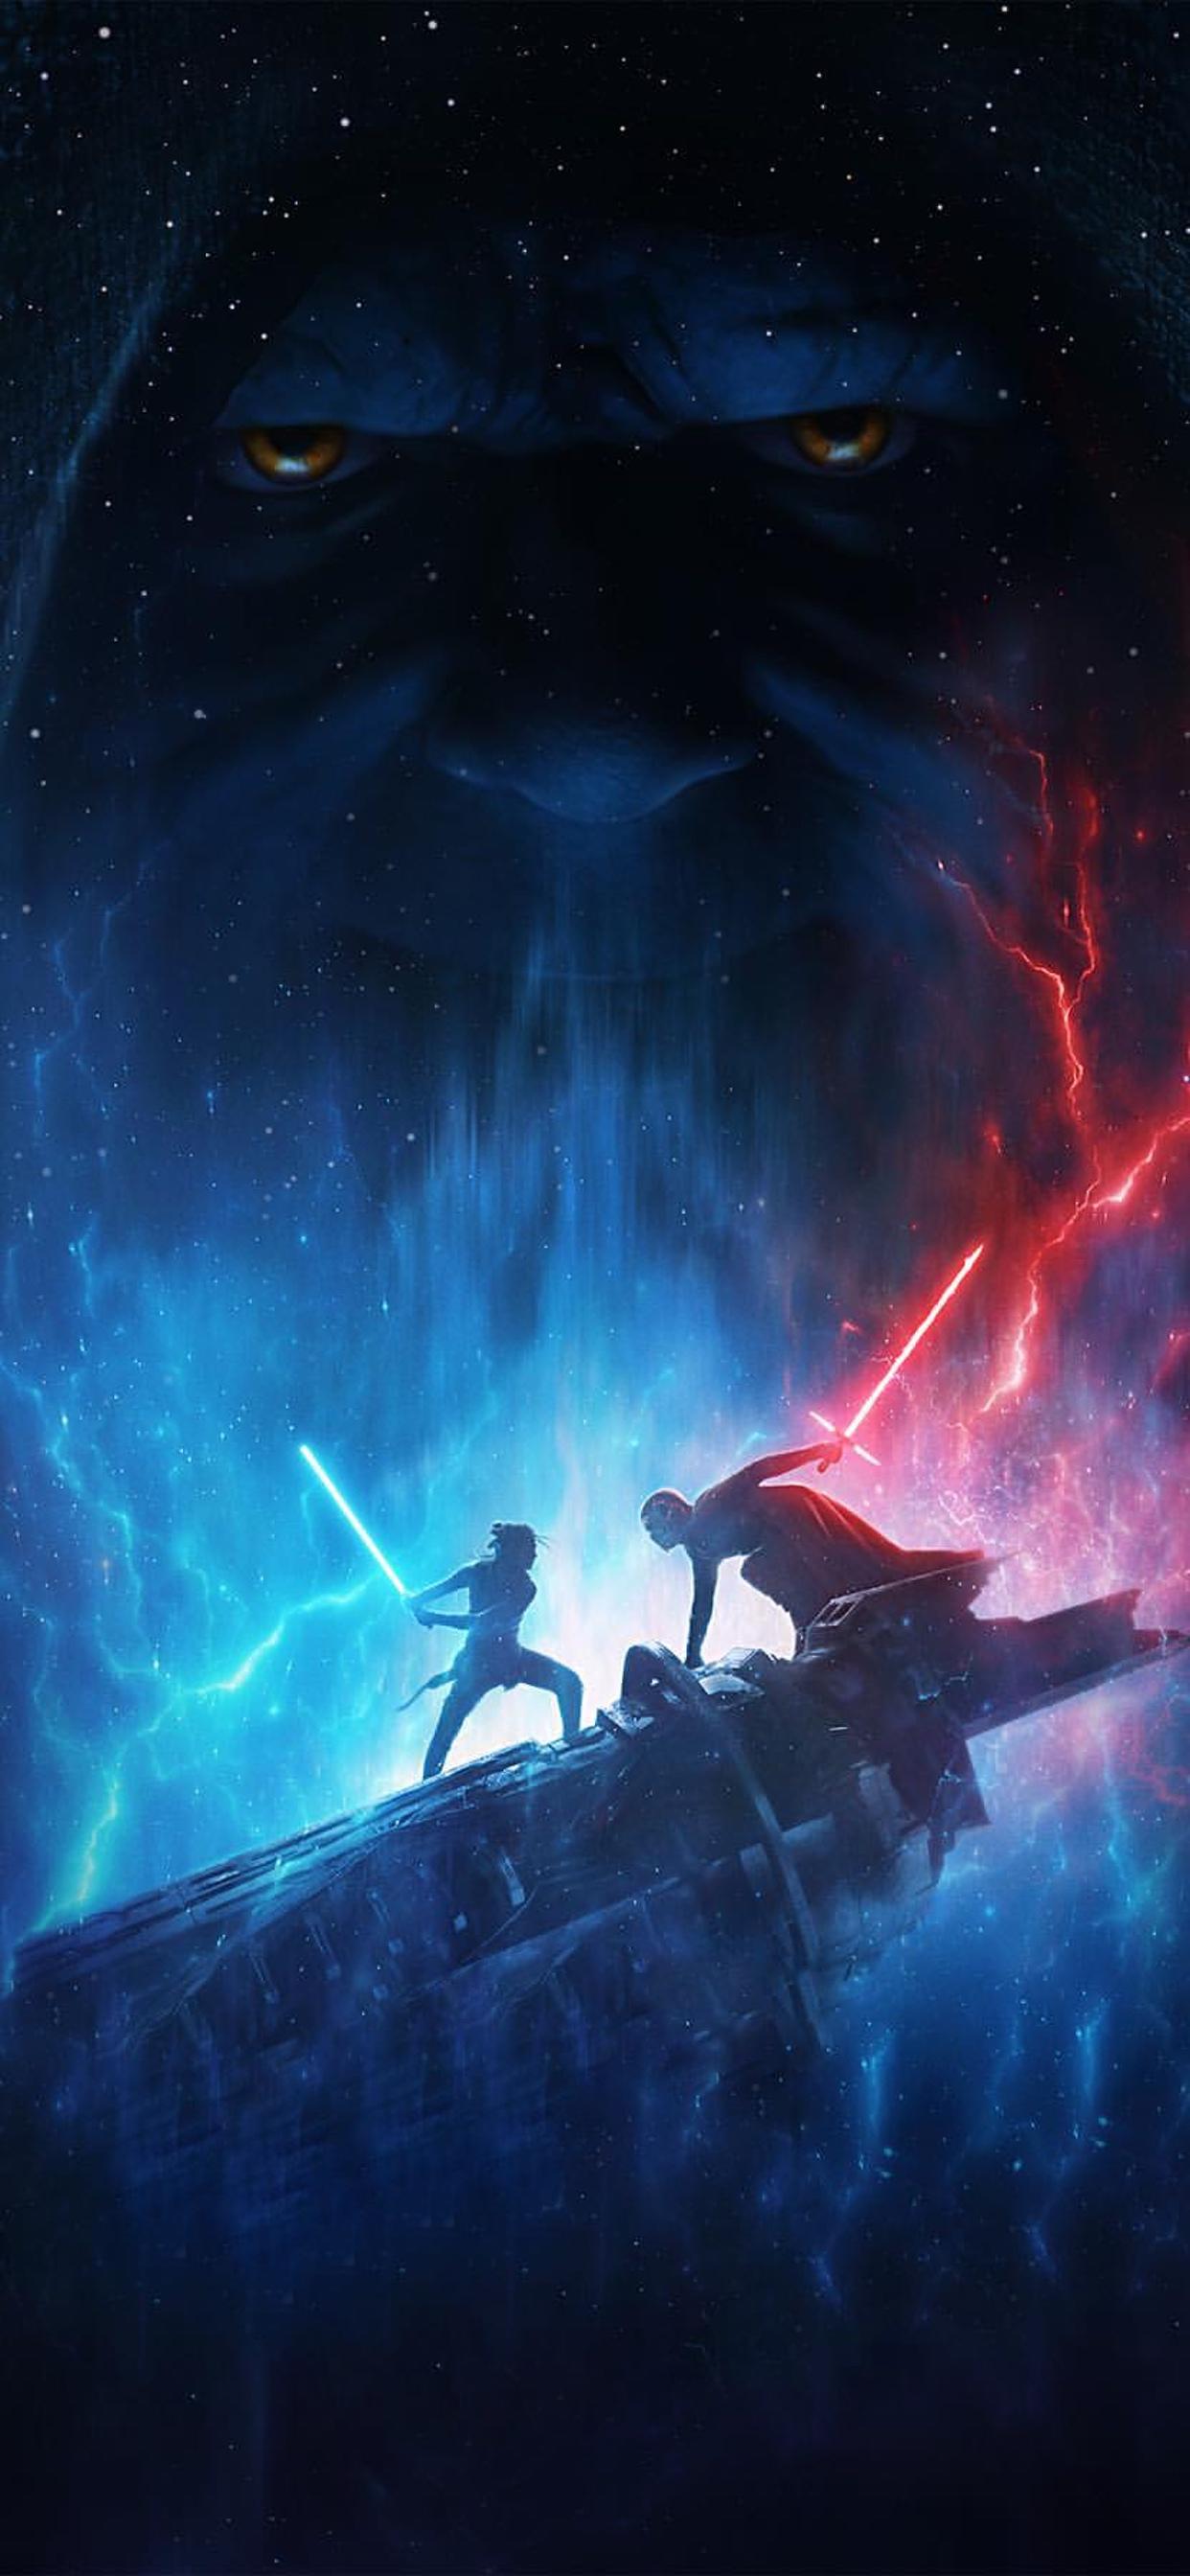 New Star Wars: The Rise of Skywalker iPhone wallpaper